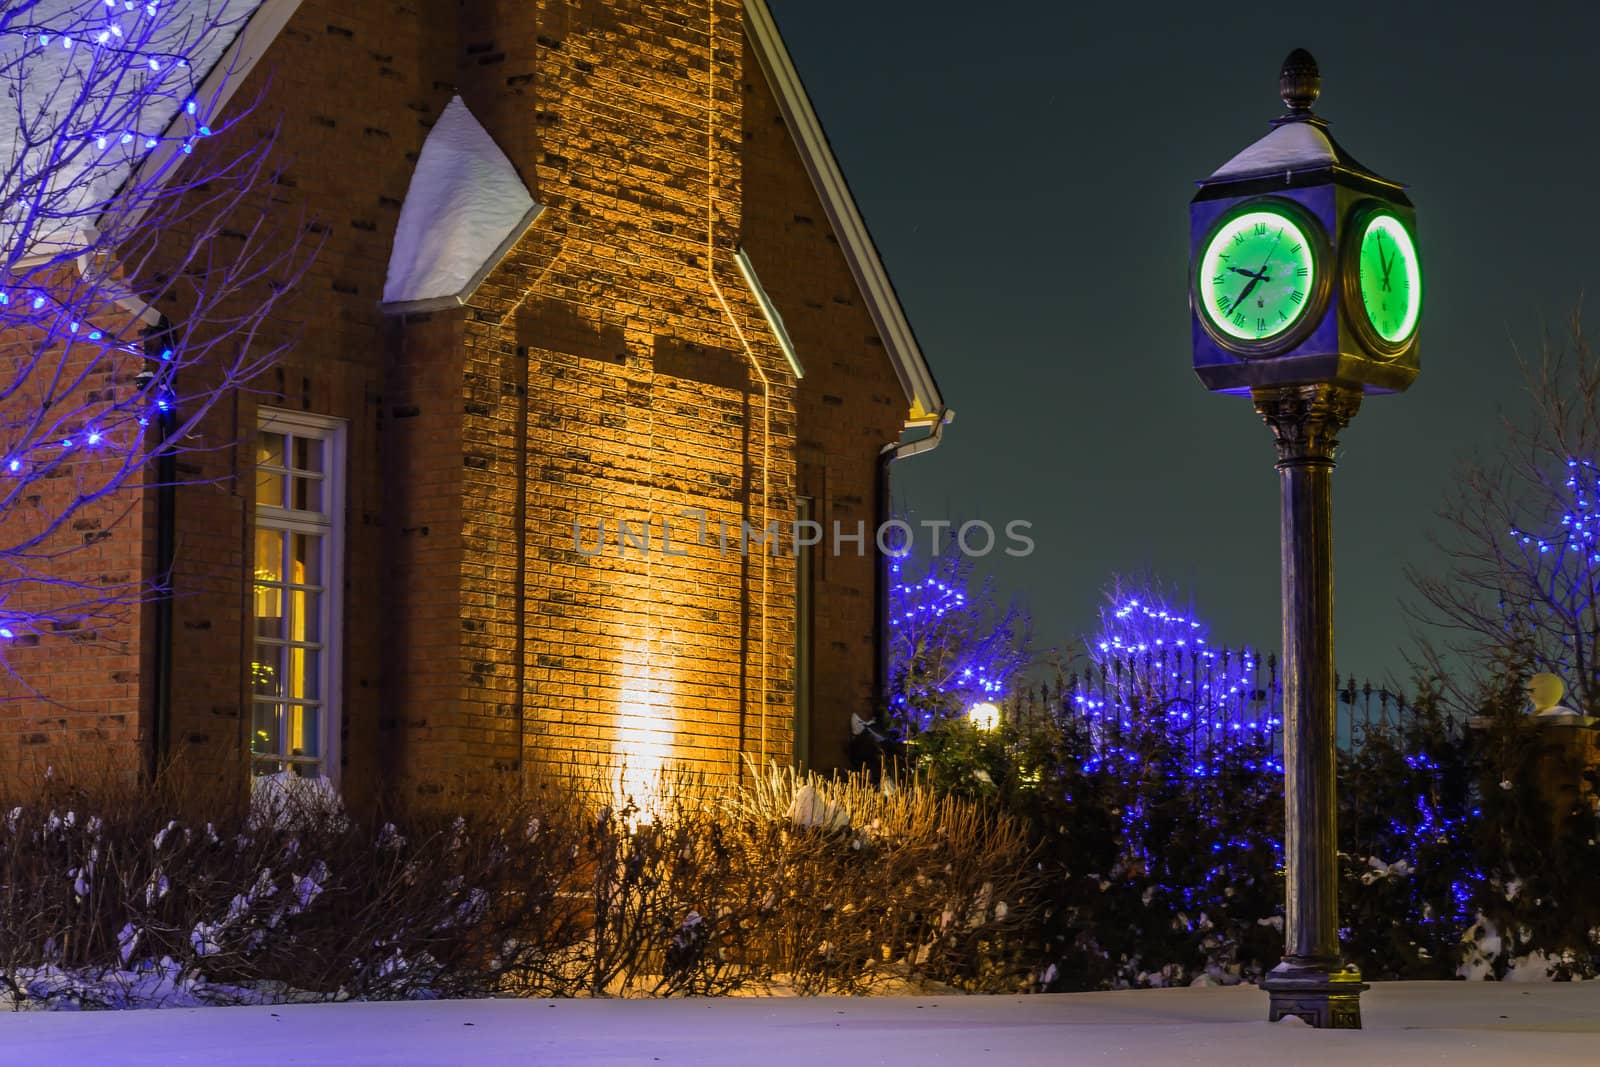 A beautiful old style green clock by petkolophoto